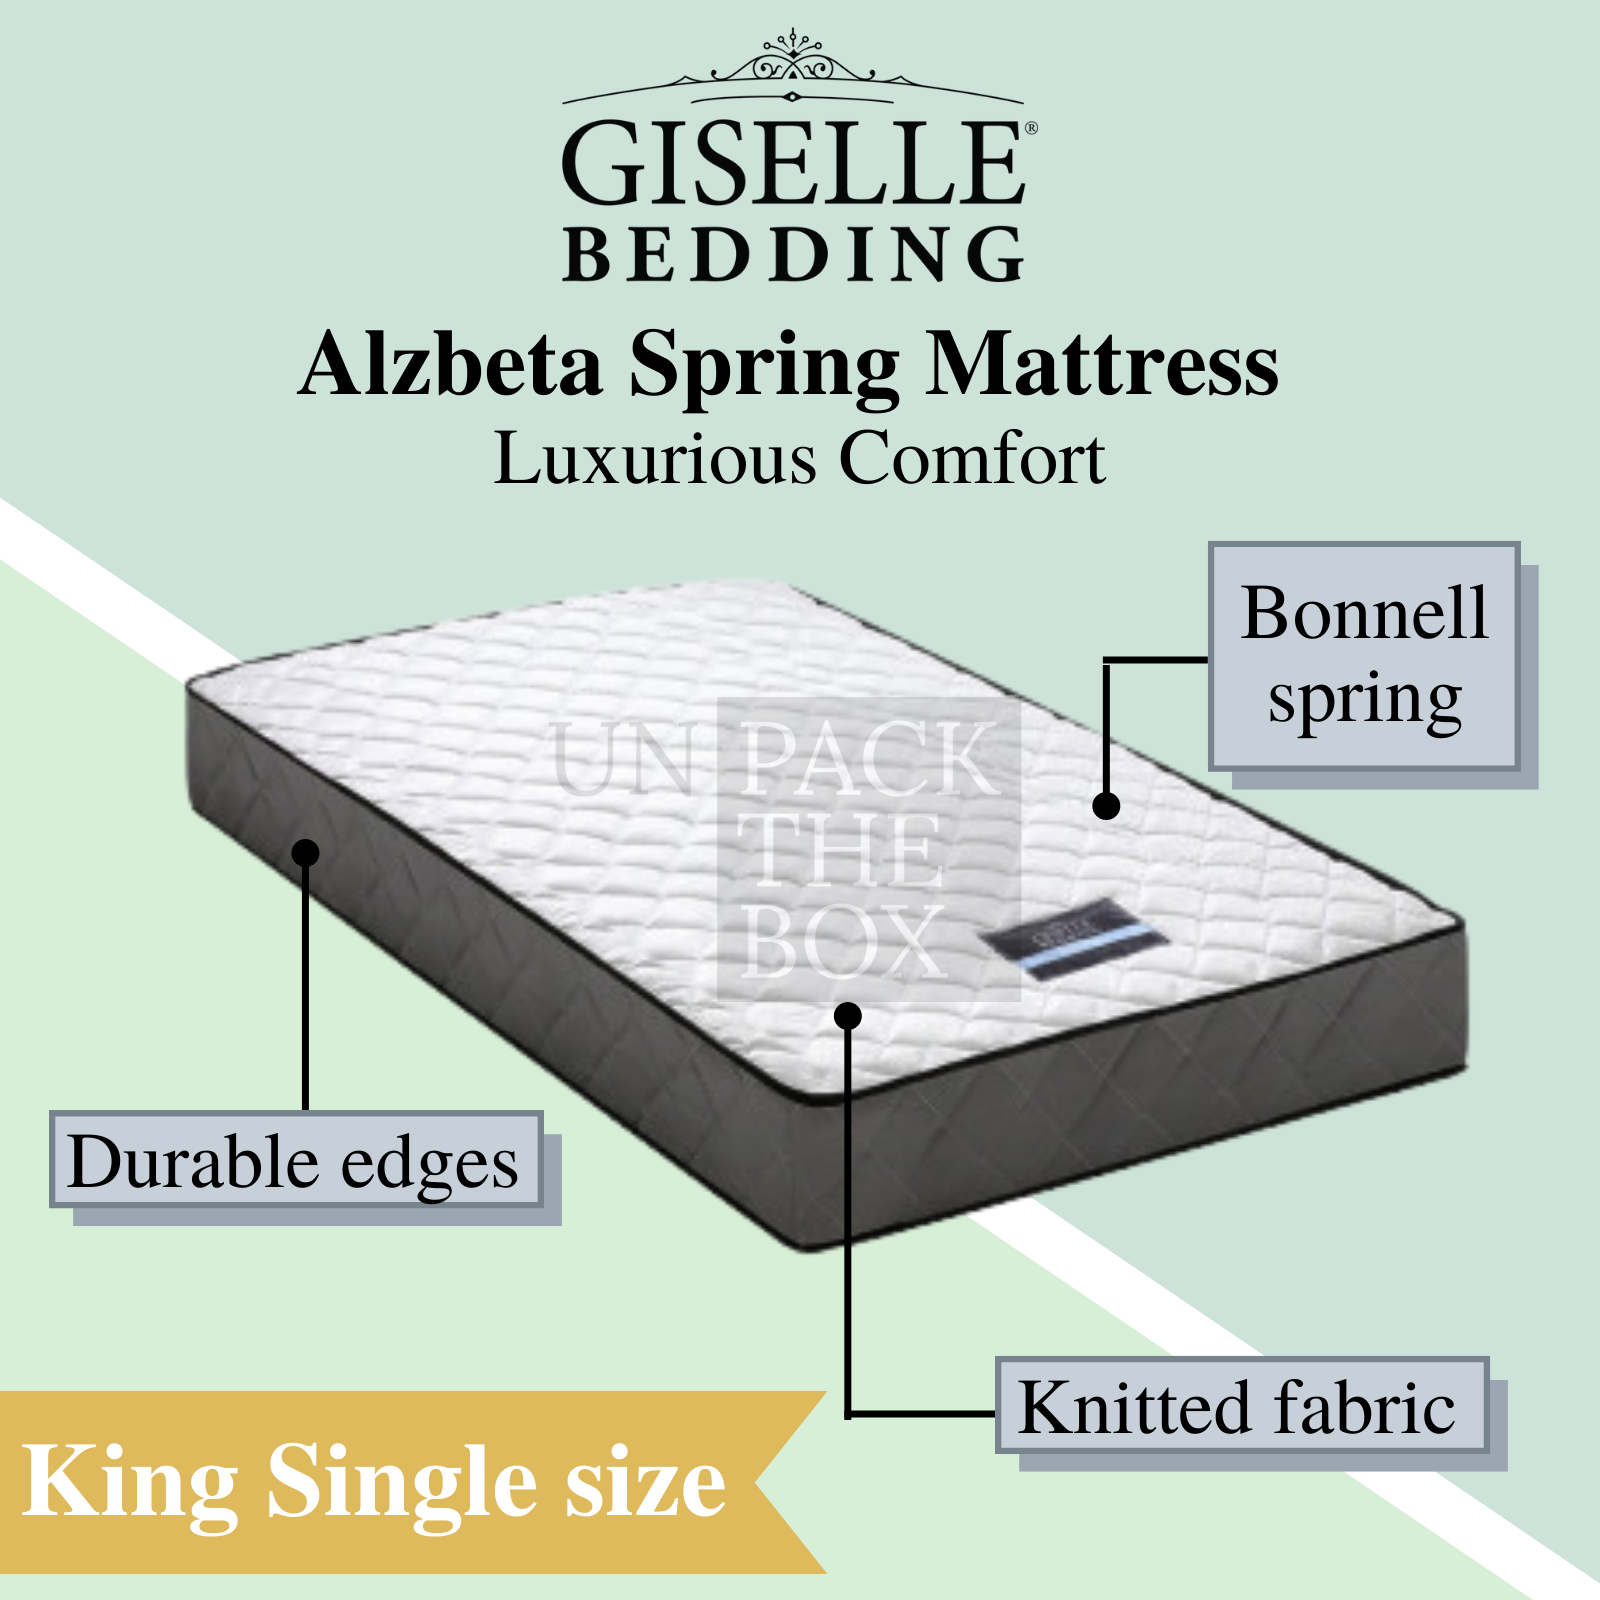 As with all of the quality mattresses, the Bonnell Spring Mattress is allergy-free and treated for dust, mould resistance.